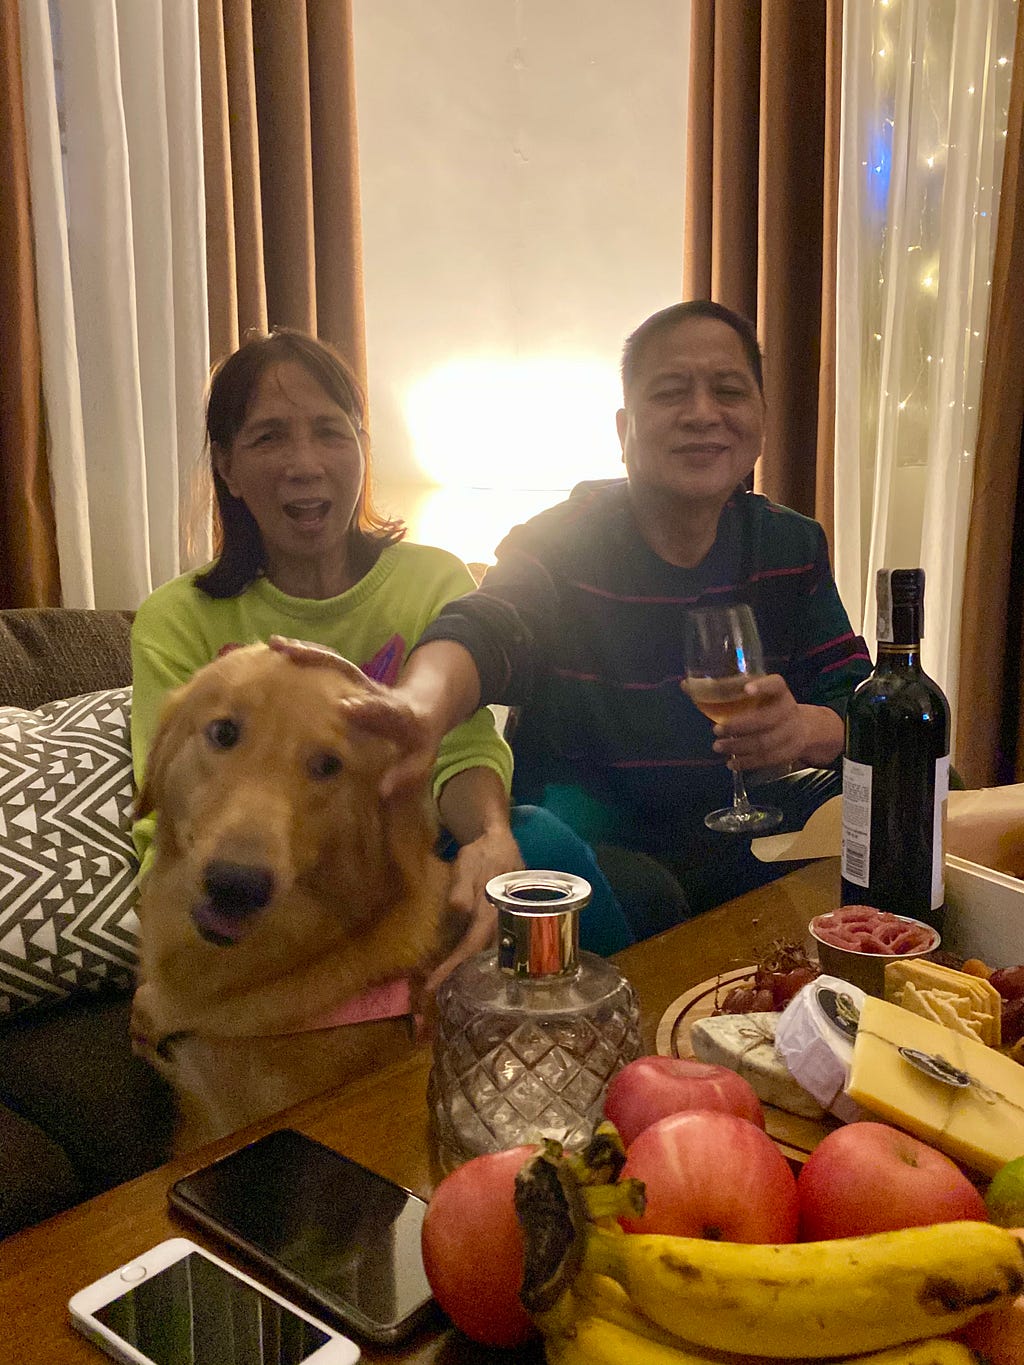 My fully recovered parents — best Christmas gift ever! (December, 2020)